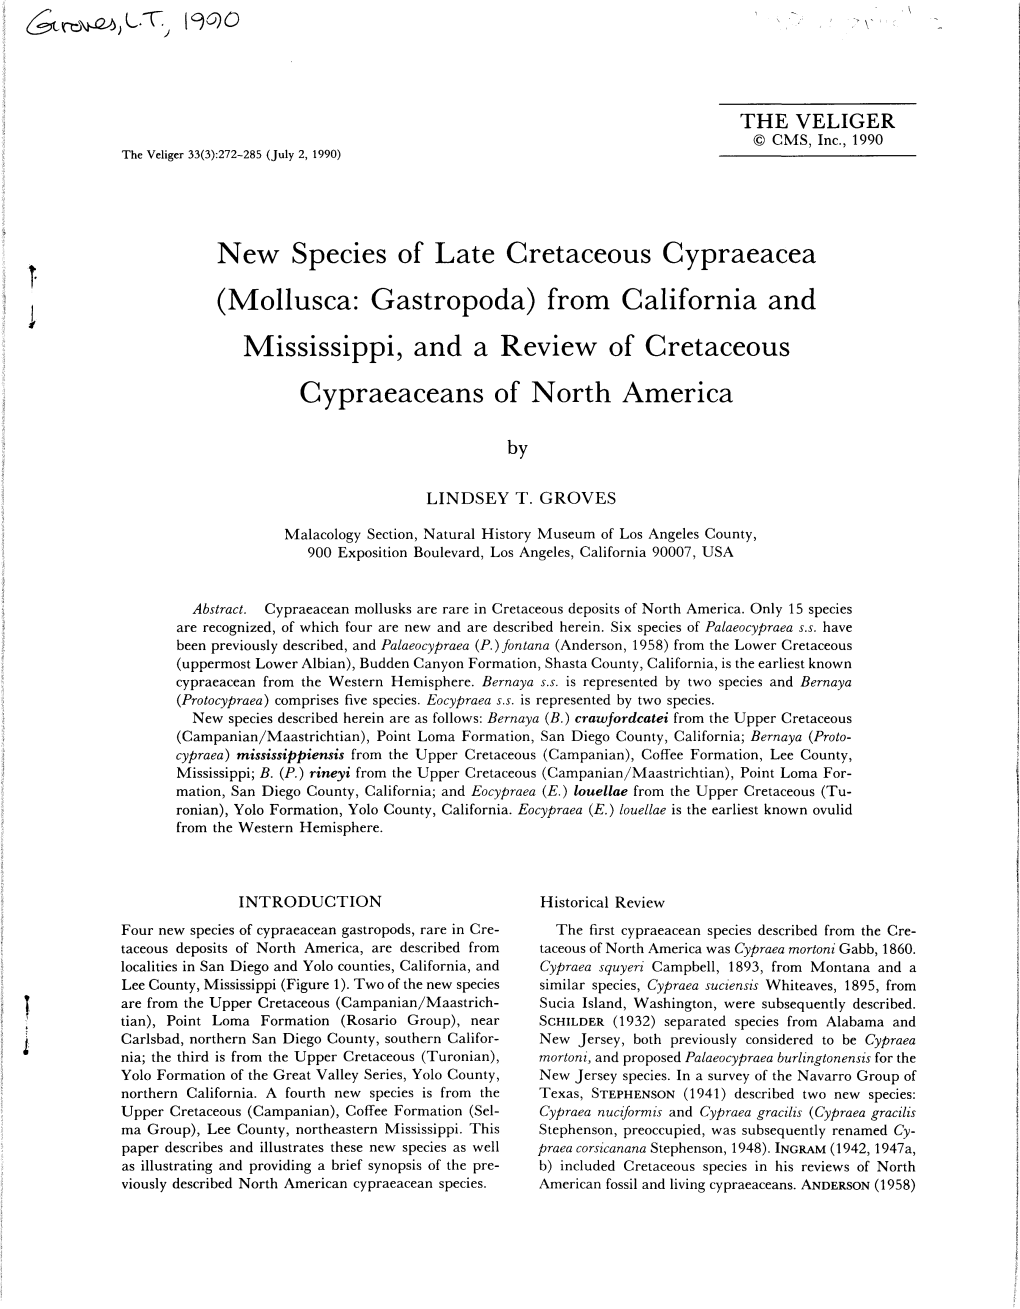 Mollusca: Gastropoda) from California and Mississippi, and a Review of Cretaceous Gypraeaceans of North America